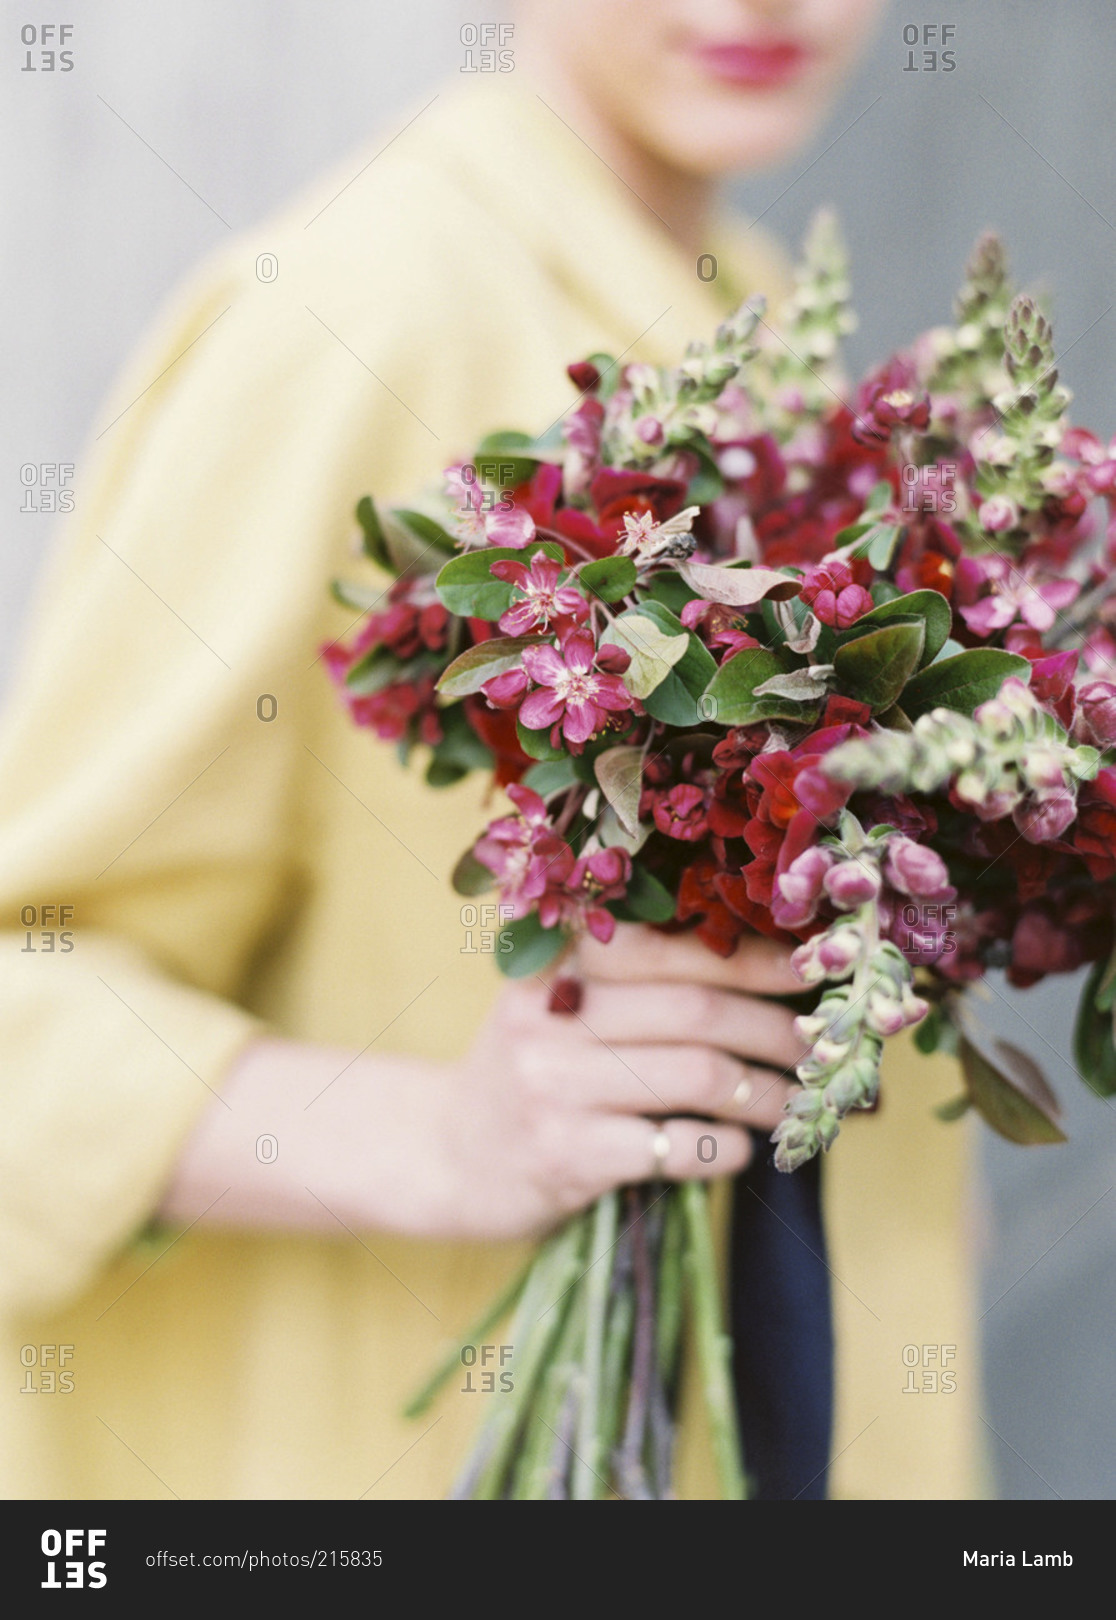 Woman holding a red flower bouquet